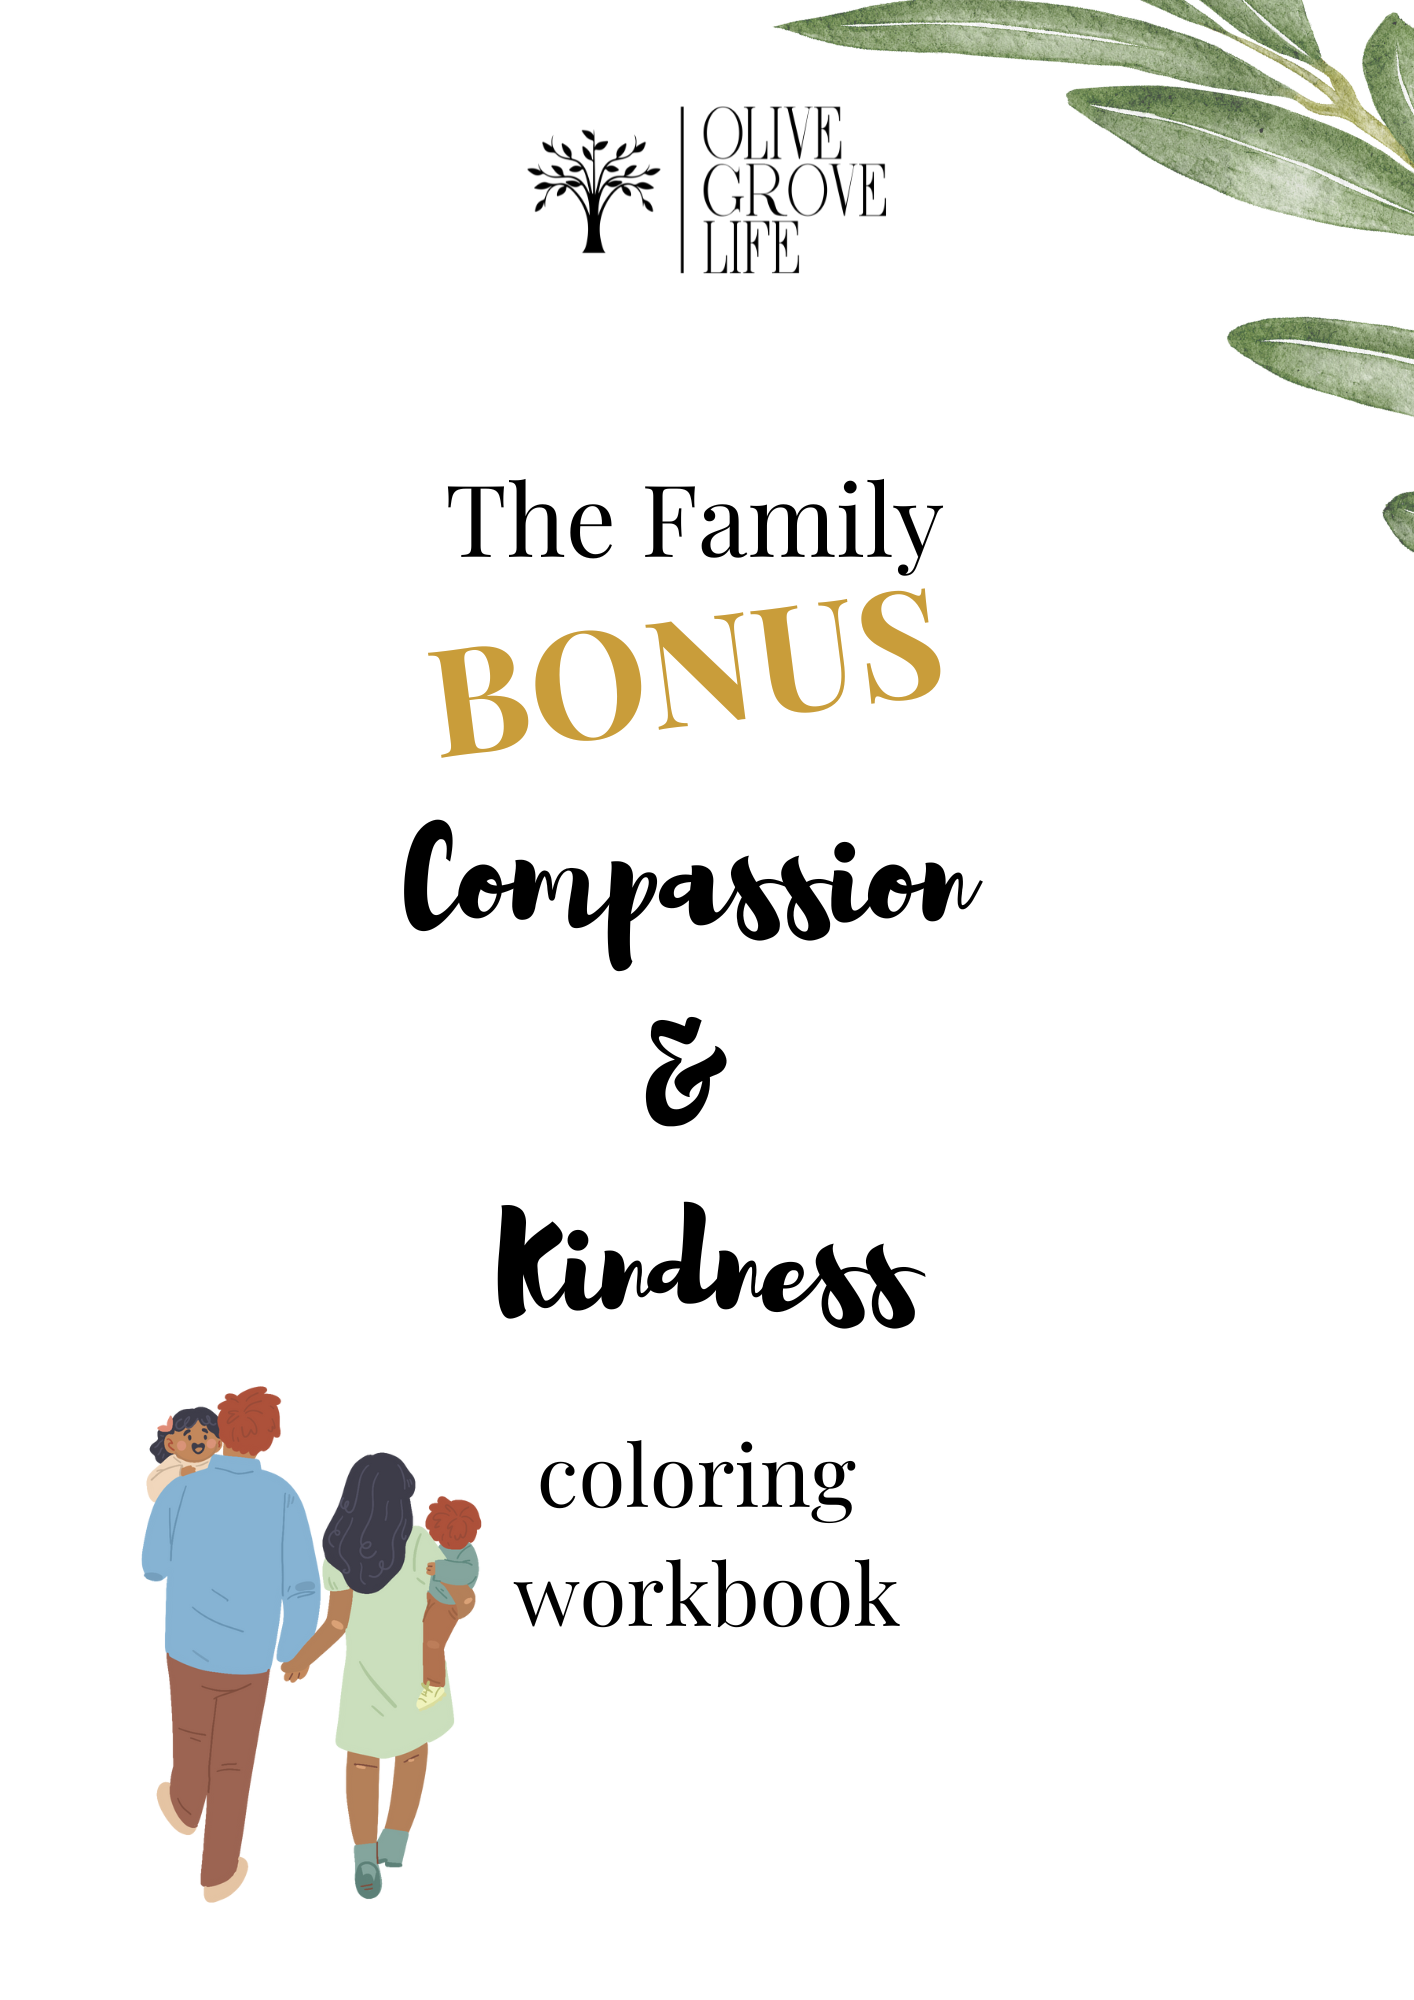 Compassion and kindness coloring workbook cover